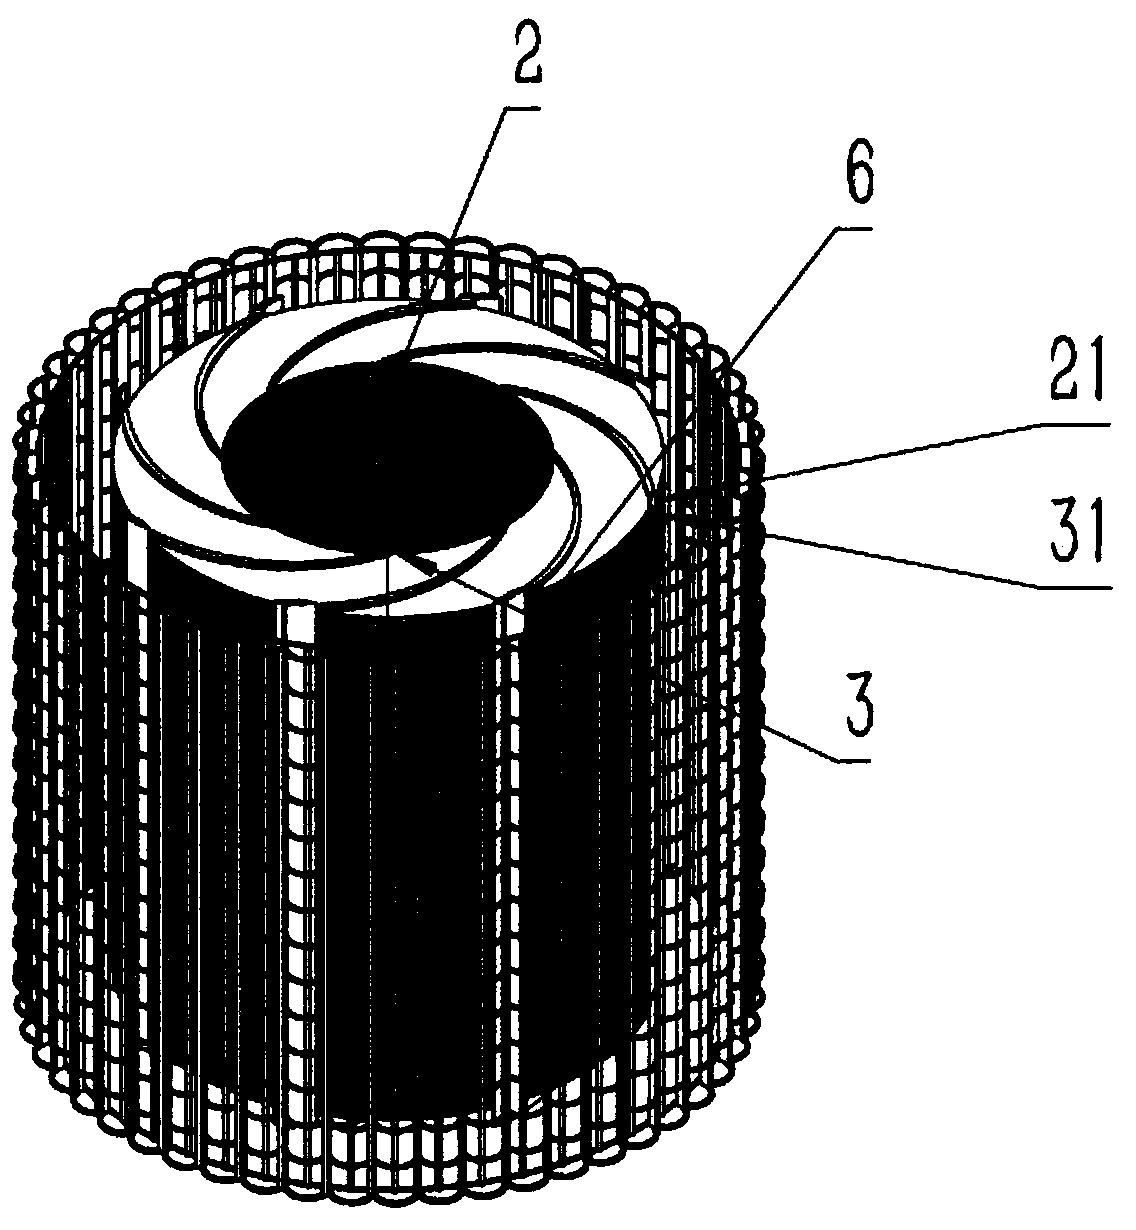 A strong electric field dielectric filter